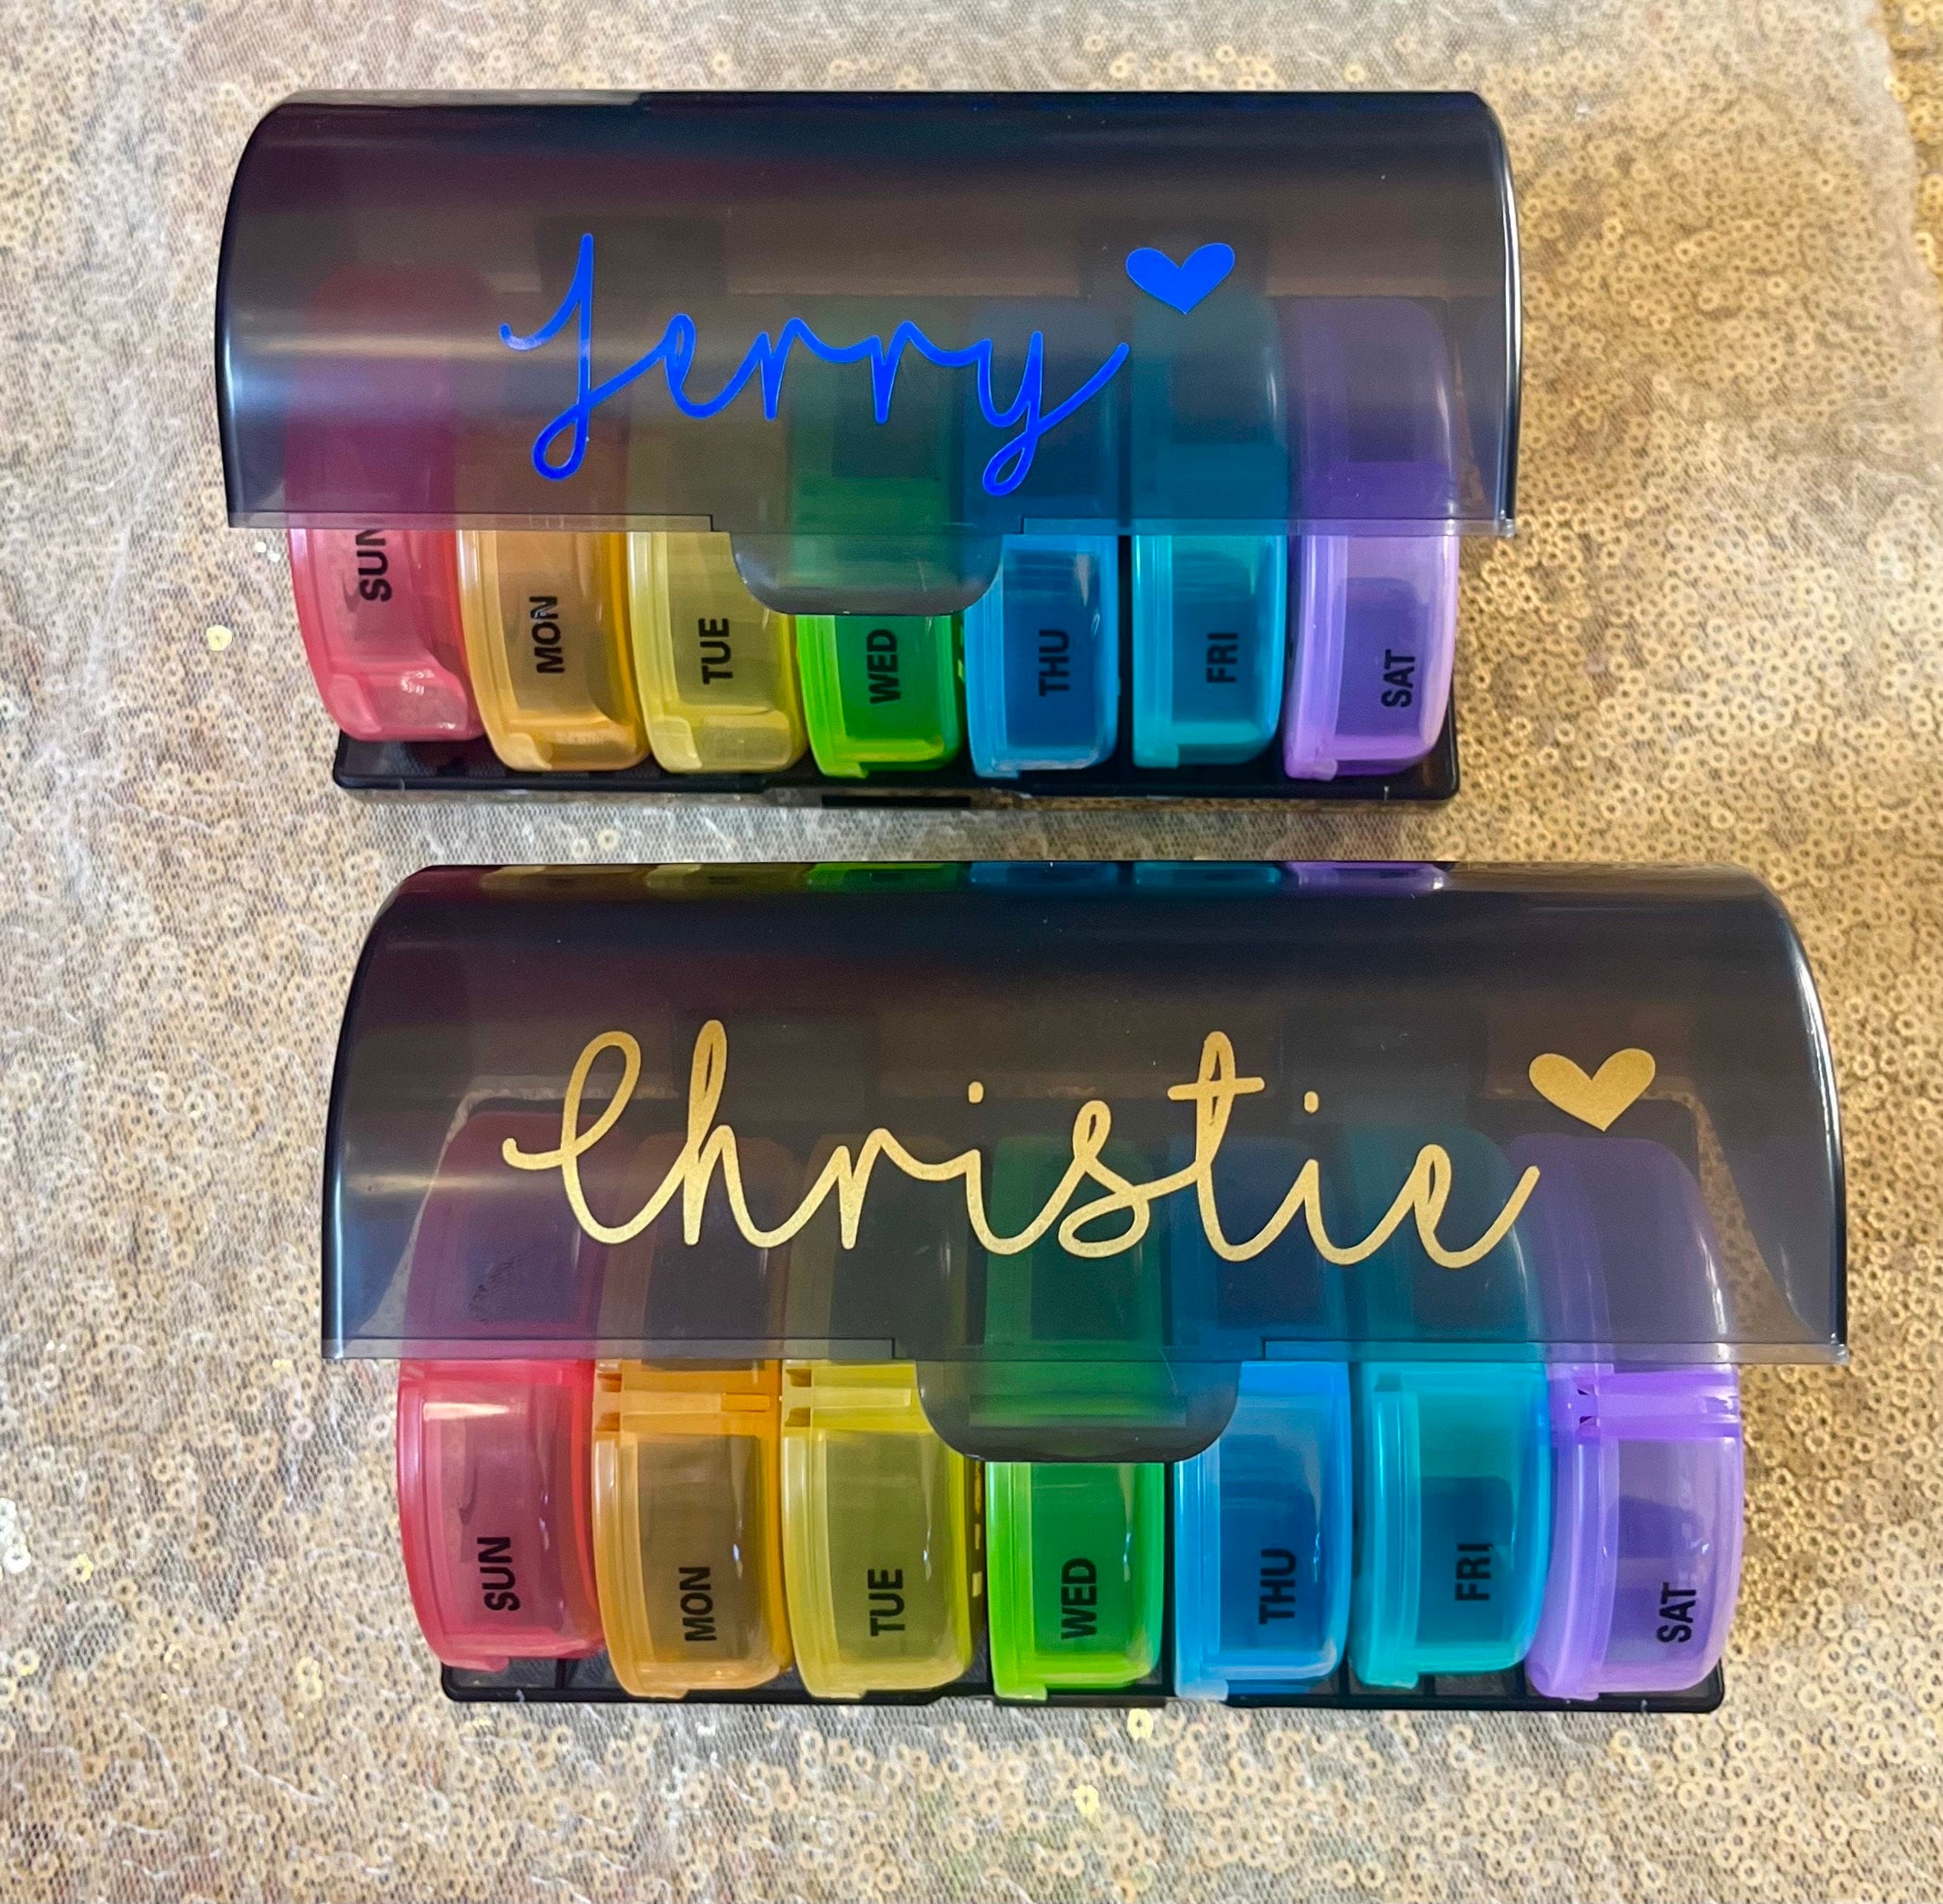 FYY Daily Pill Organizer Review 2022